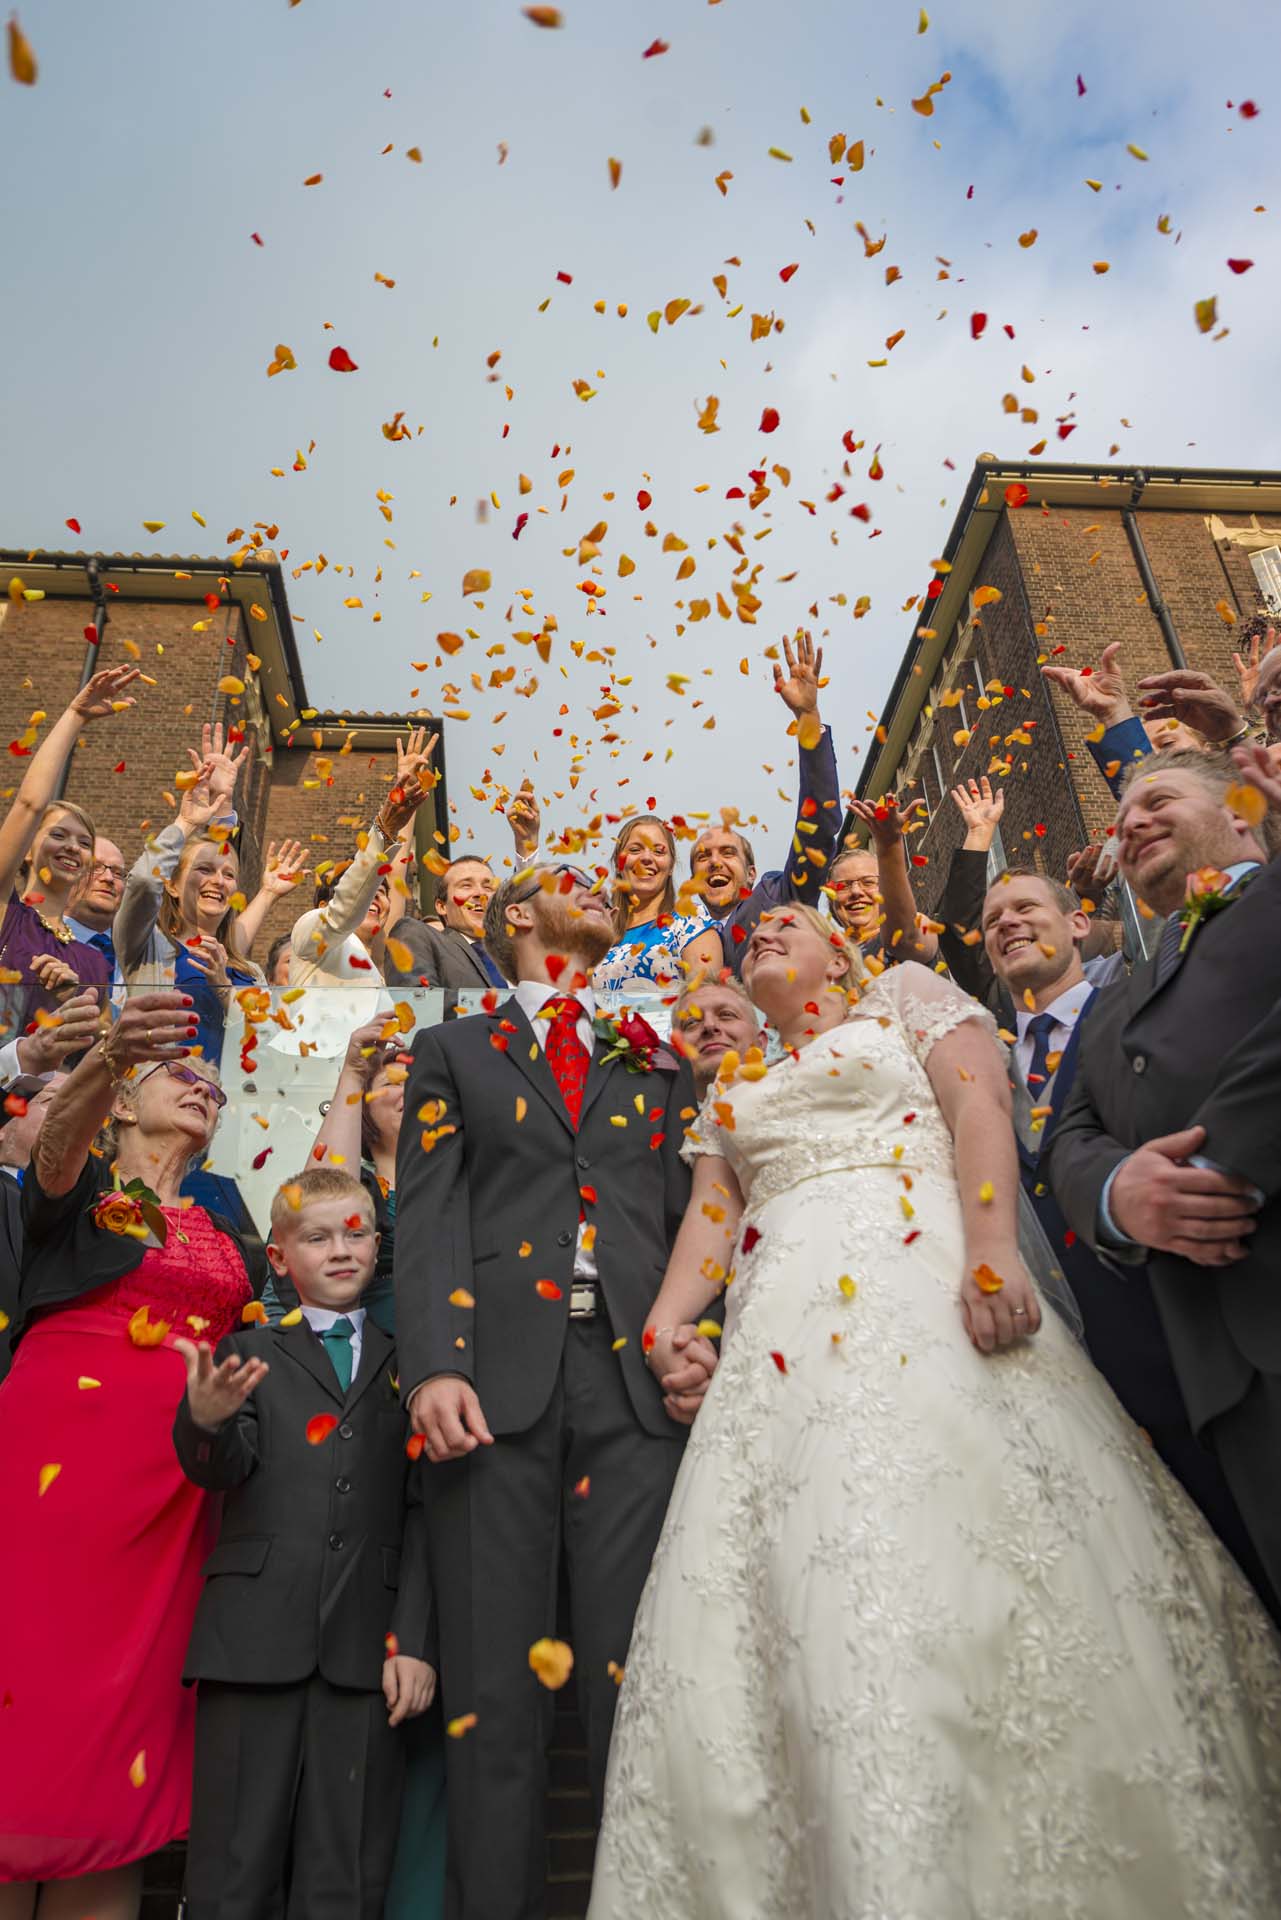 Confetti falling over bride and groom Camberwell south london wedding photographer article on extreme wide angle lenses